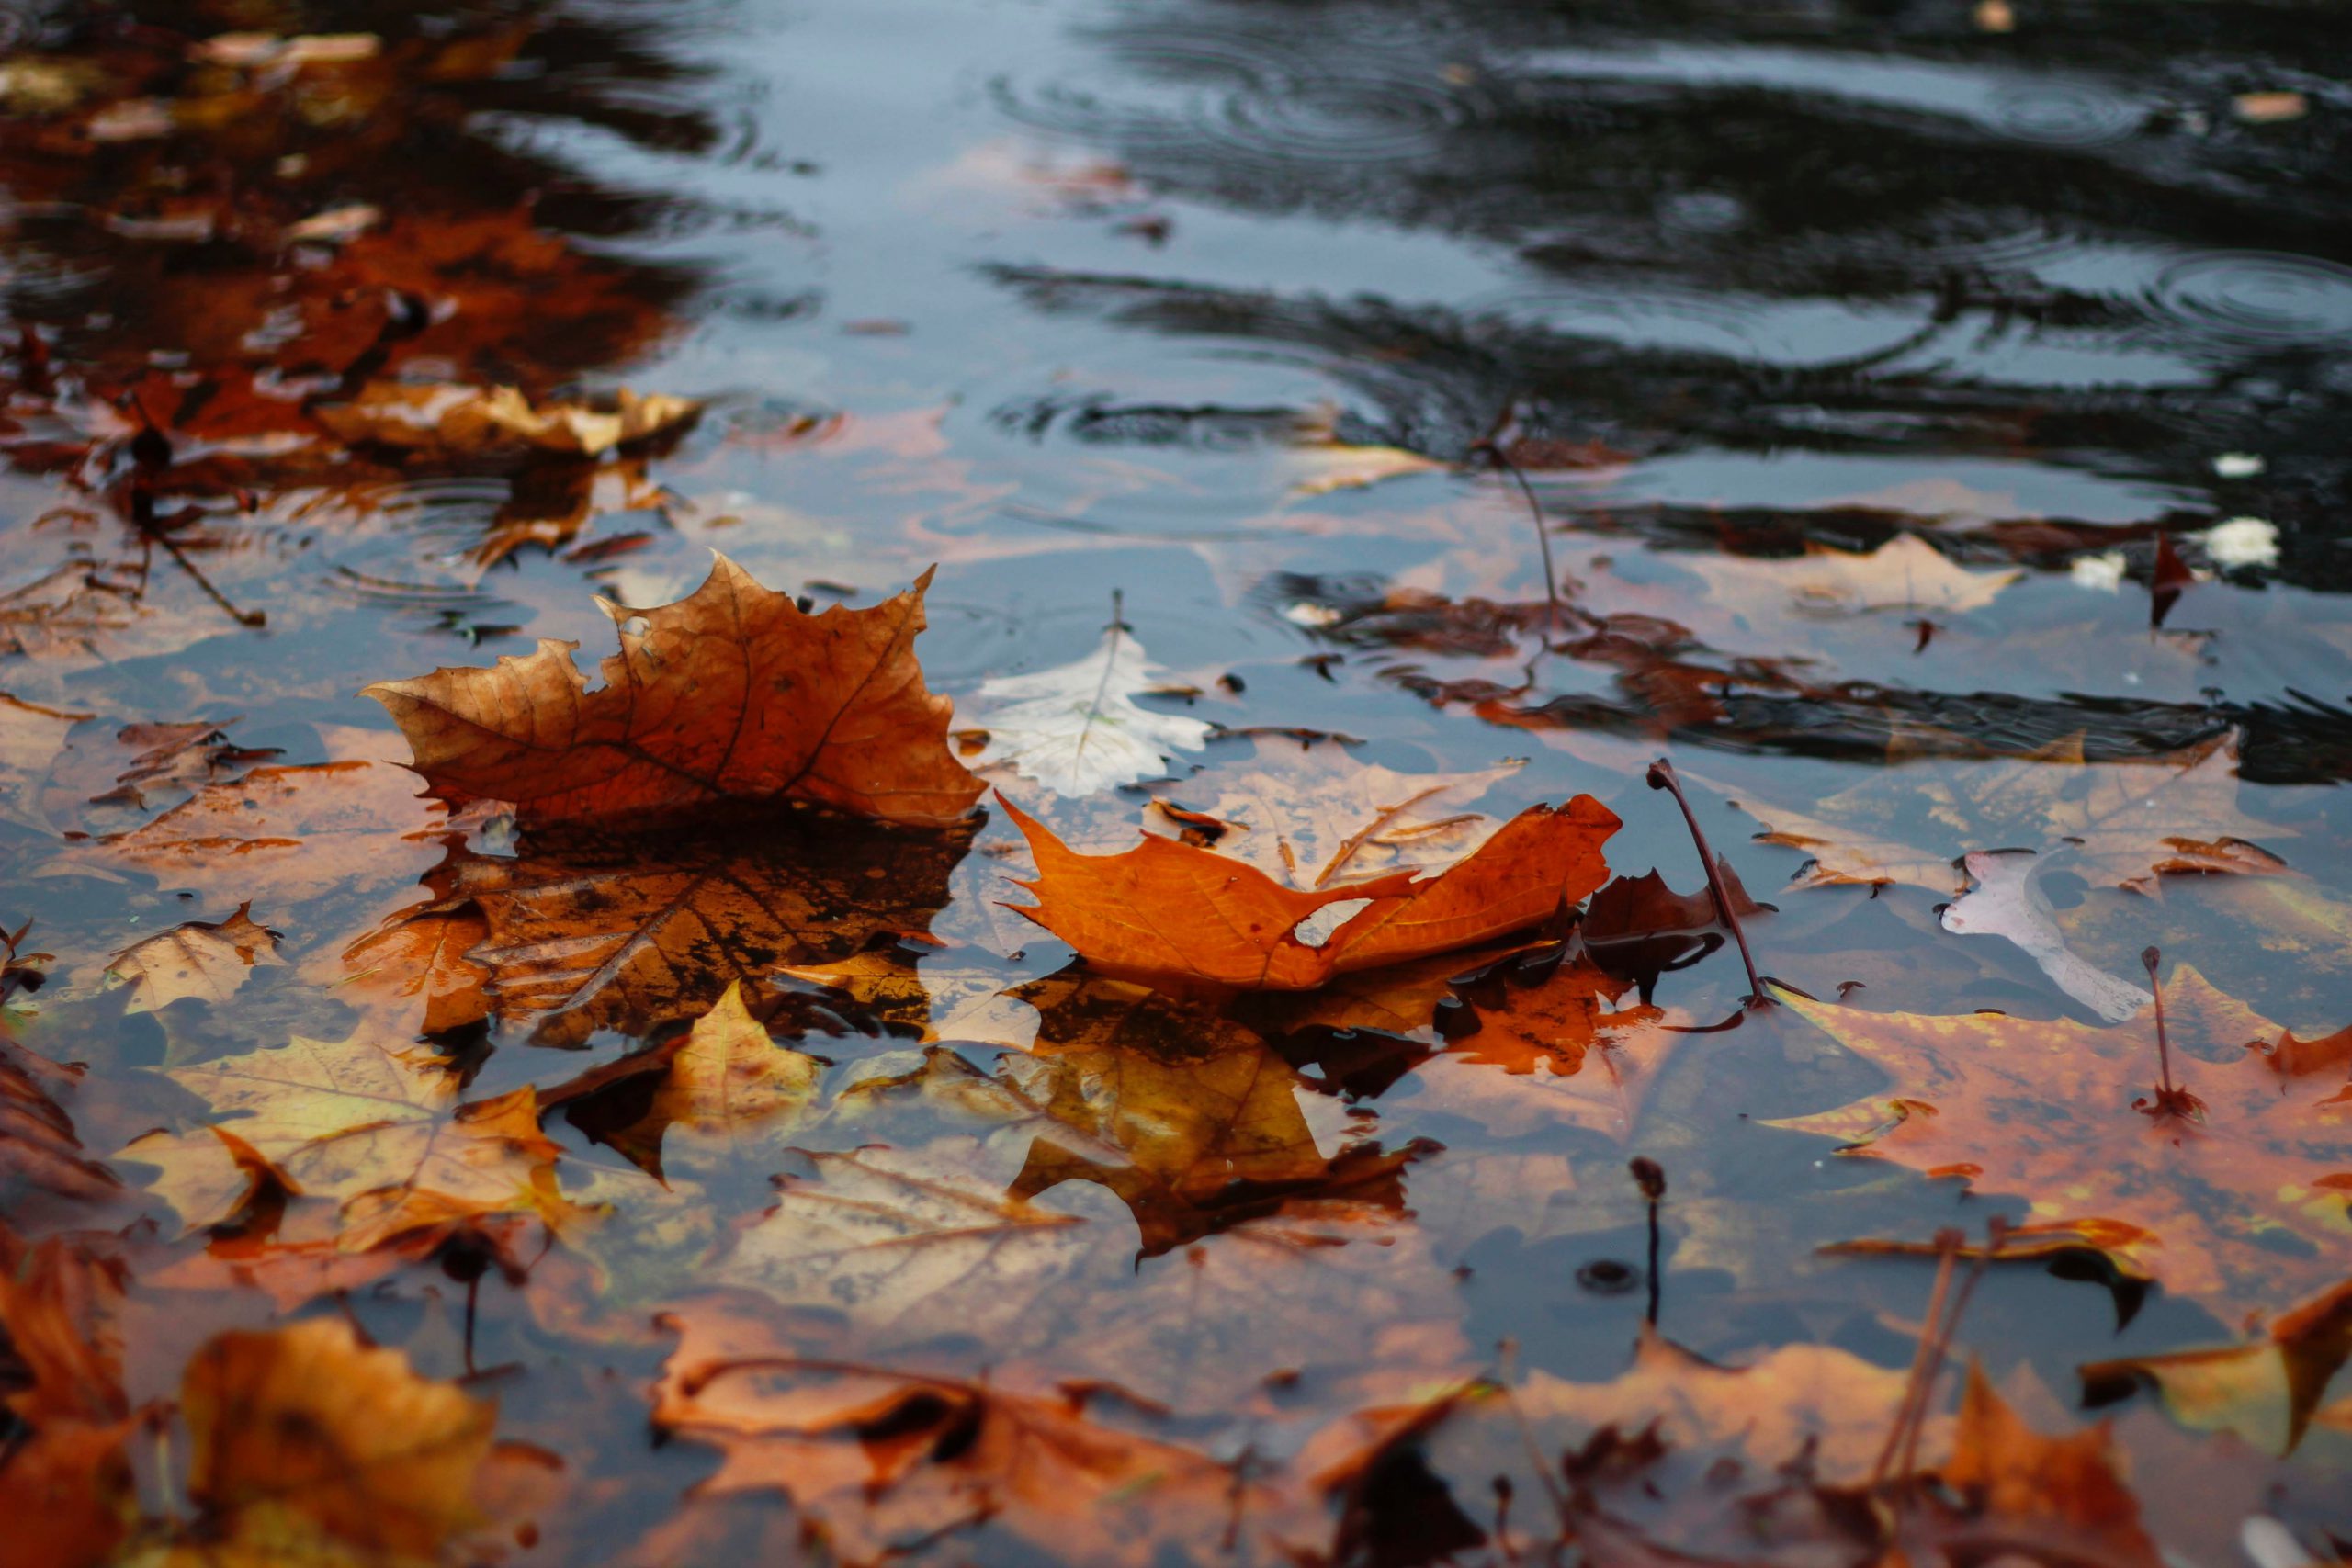 Autumn leaves submerged in water